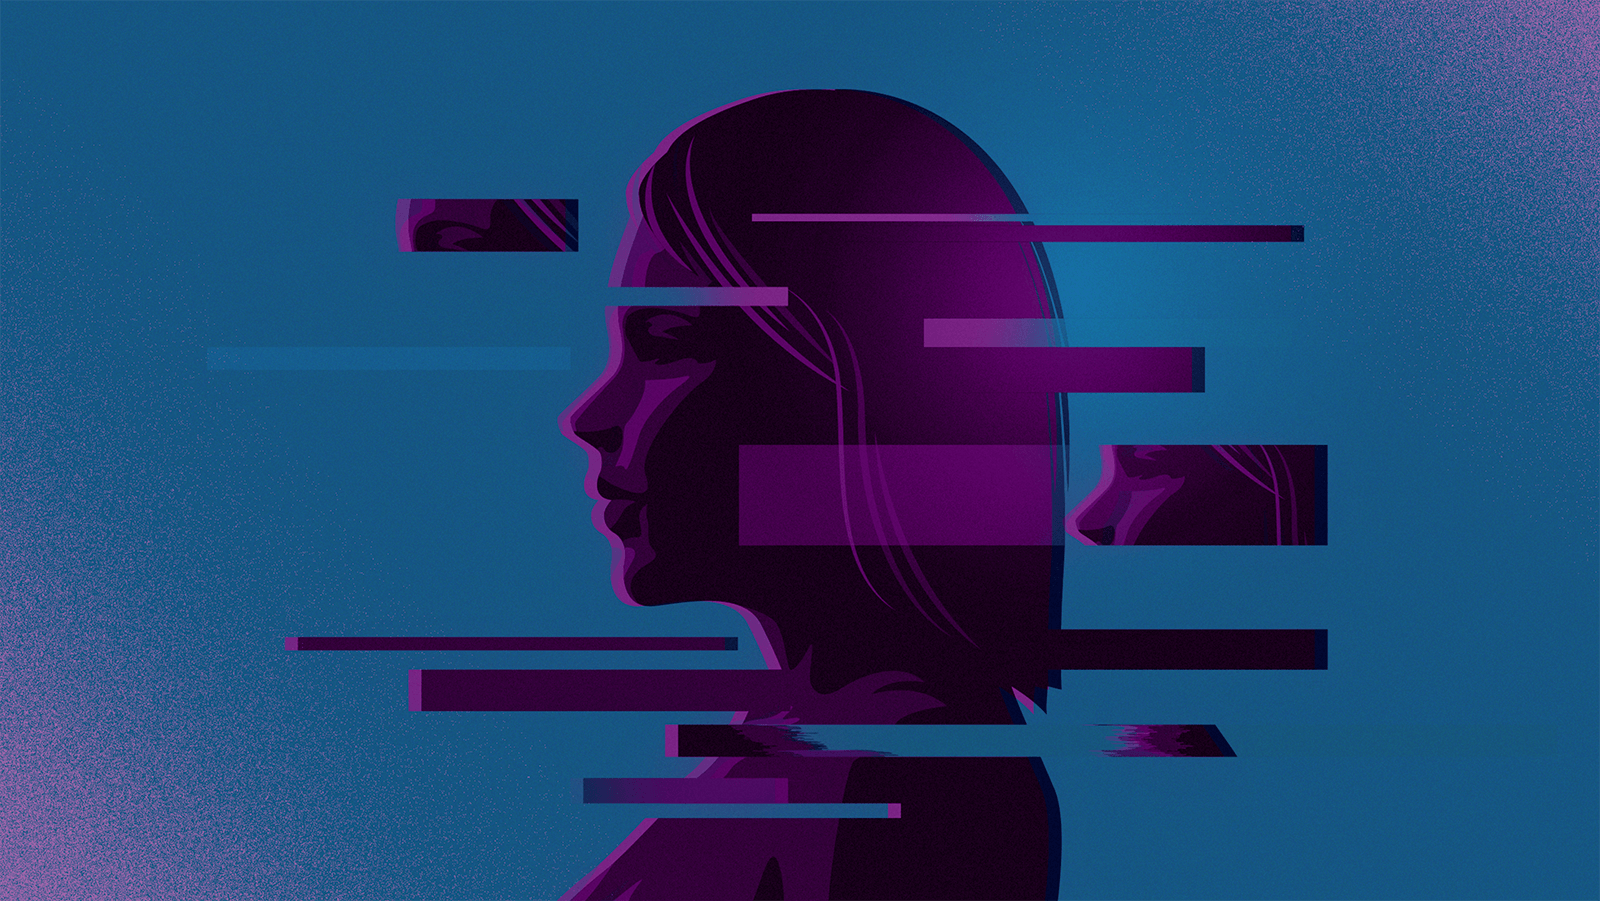 An illustration showing a glitch fragmented profile of a person.